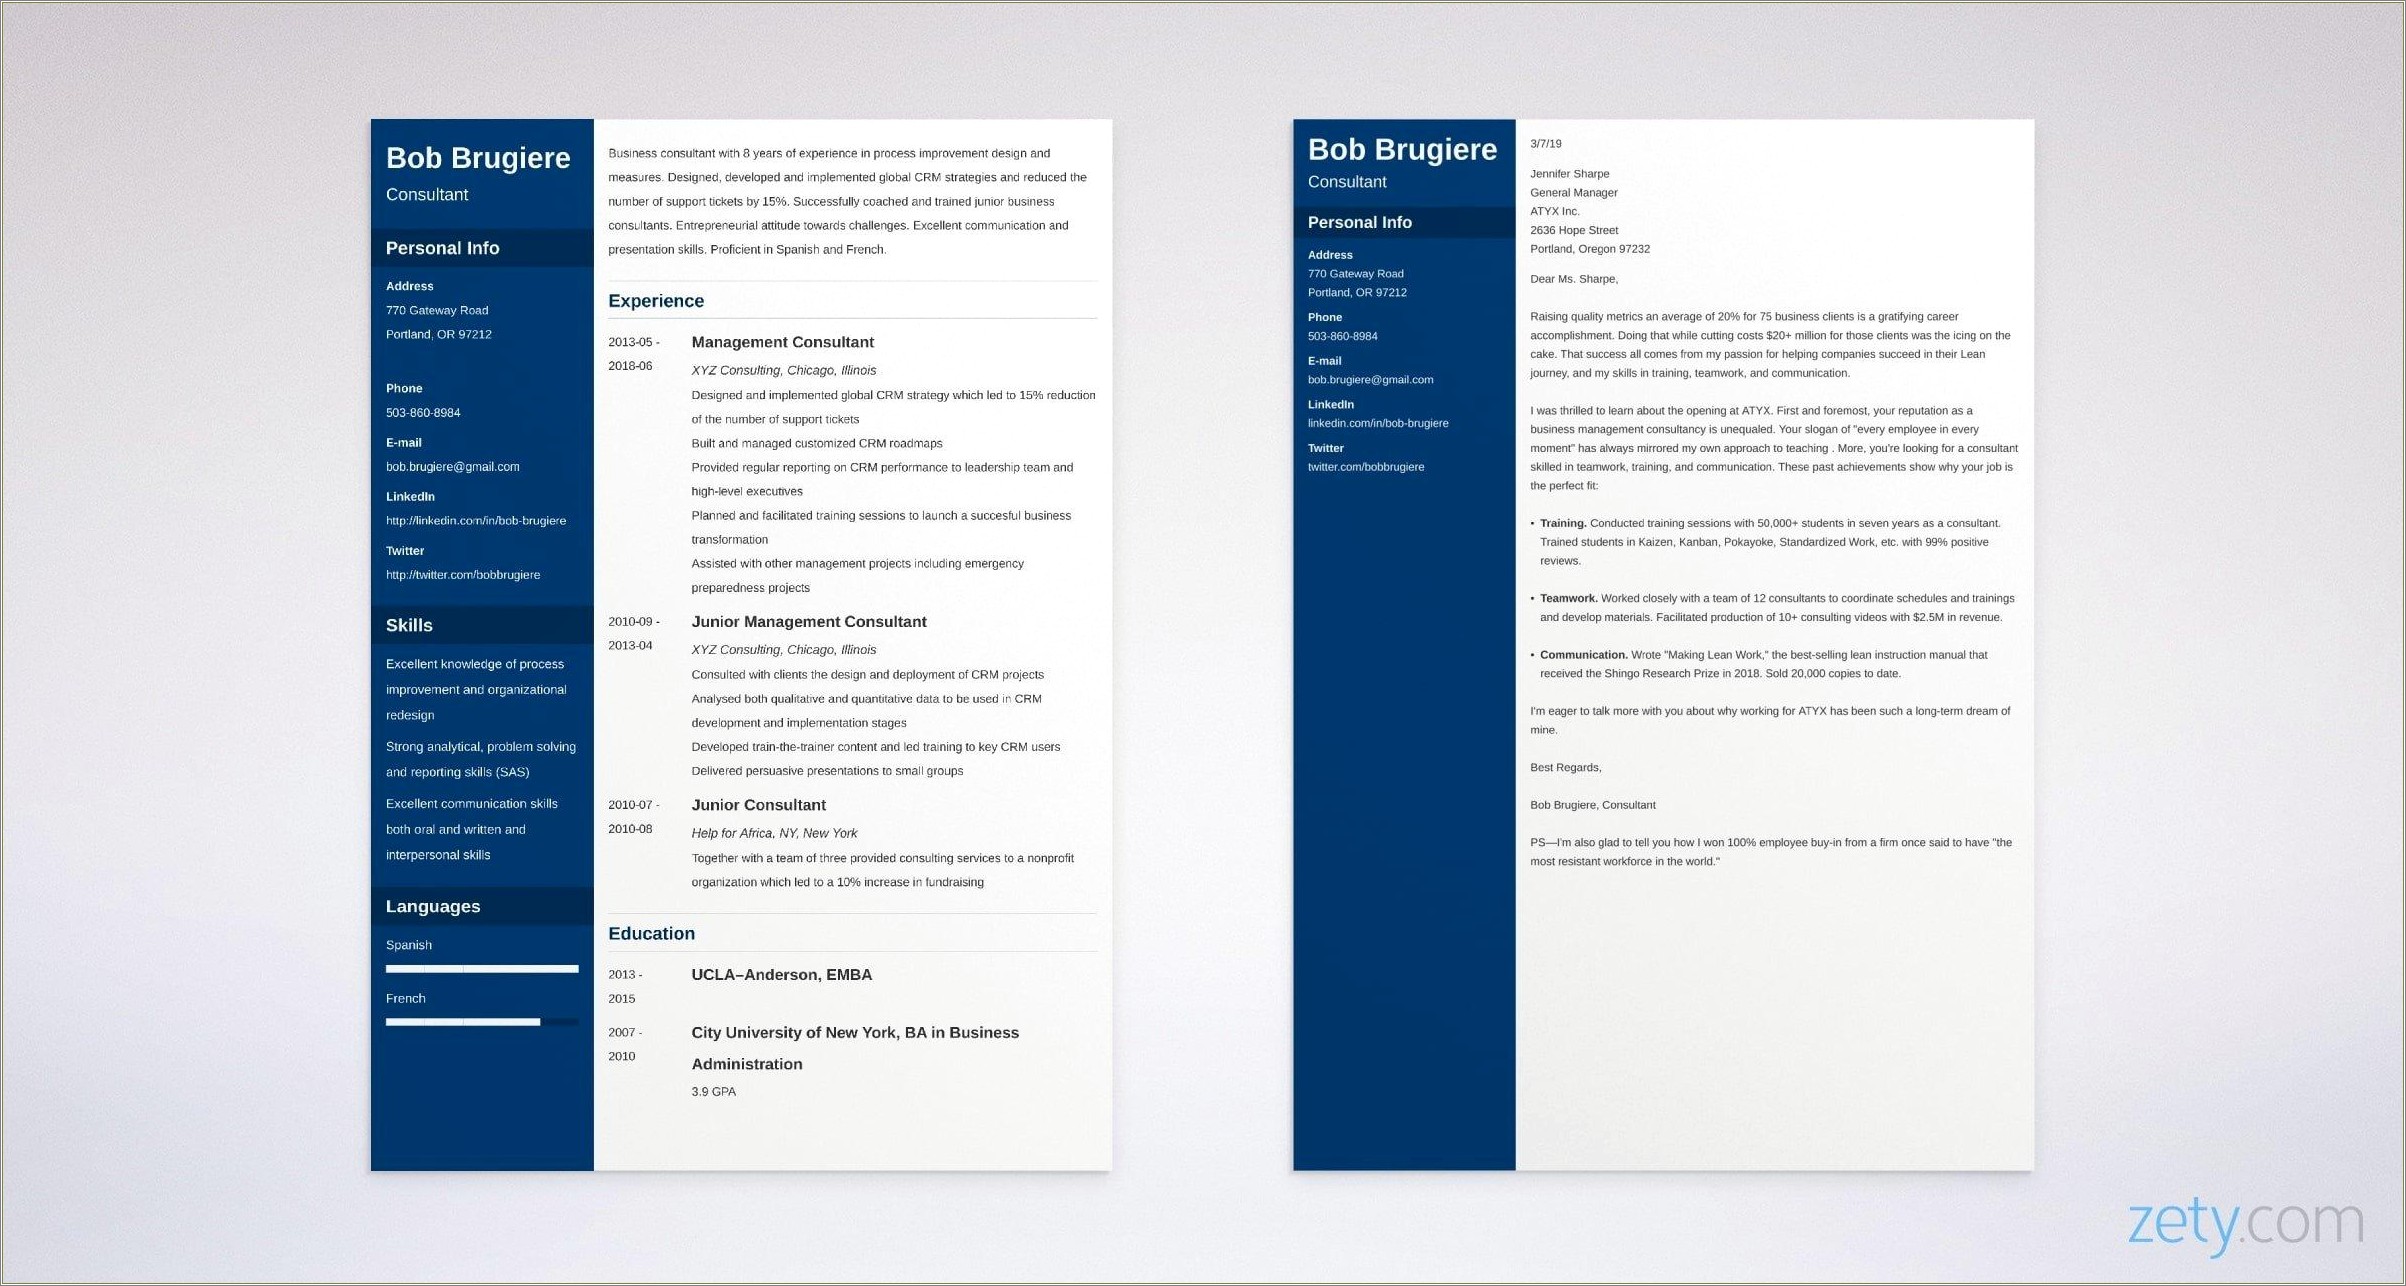 Sample Resume For Partner Business Consulting